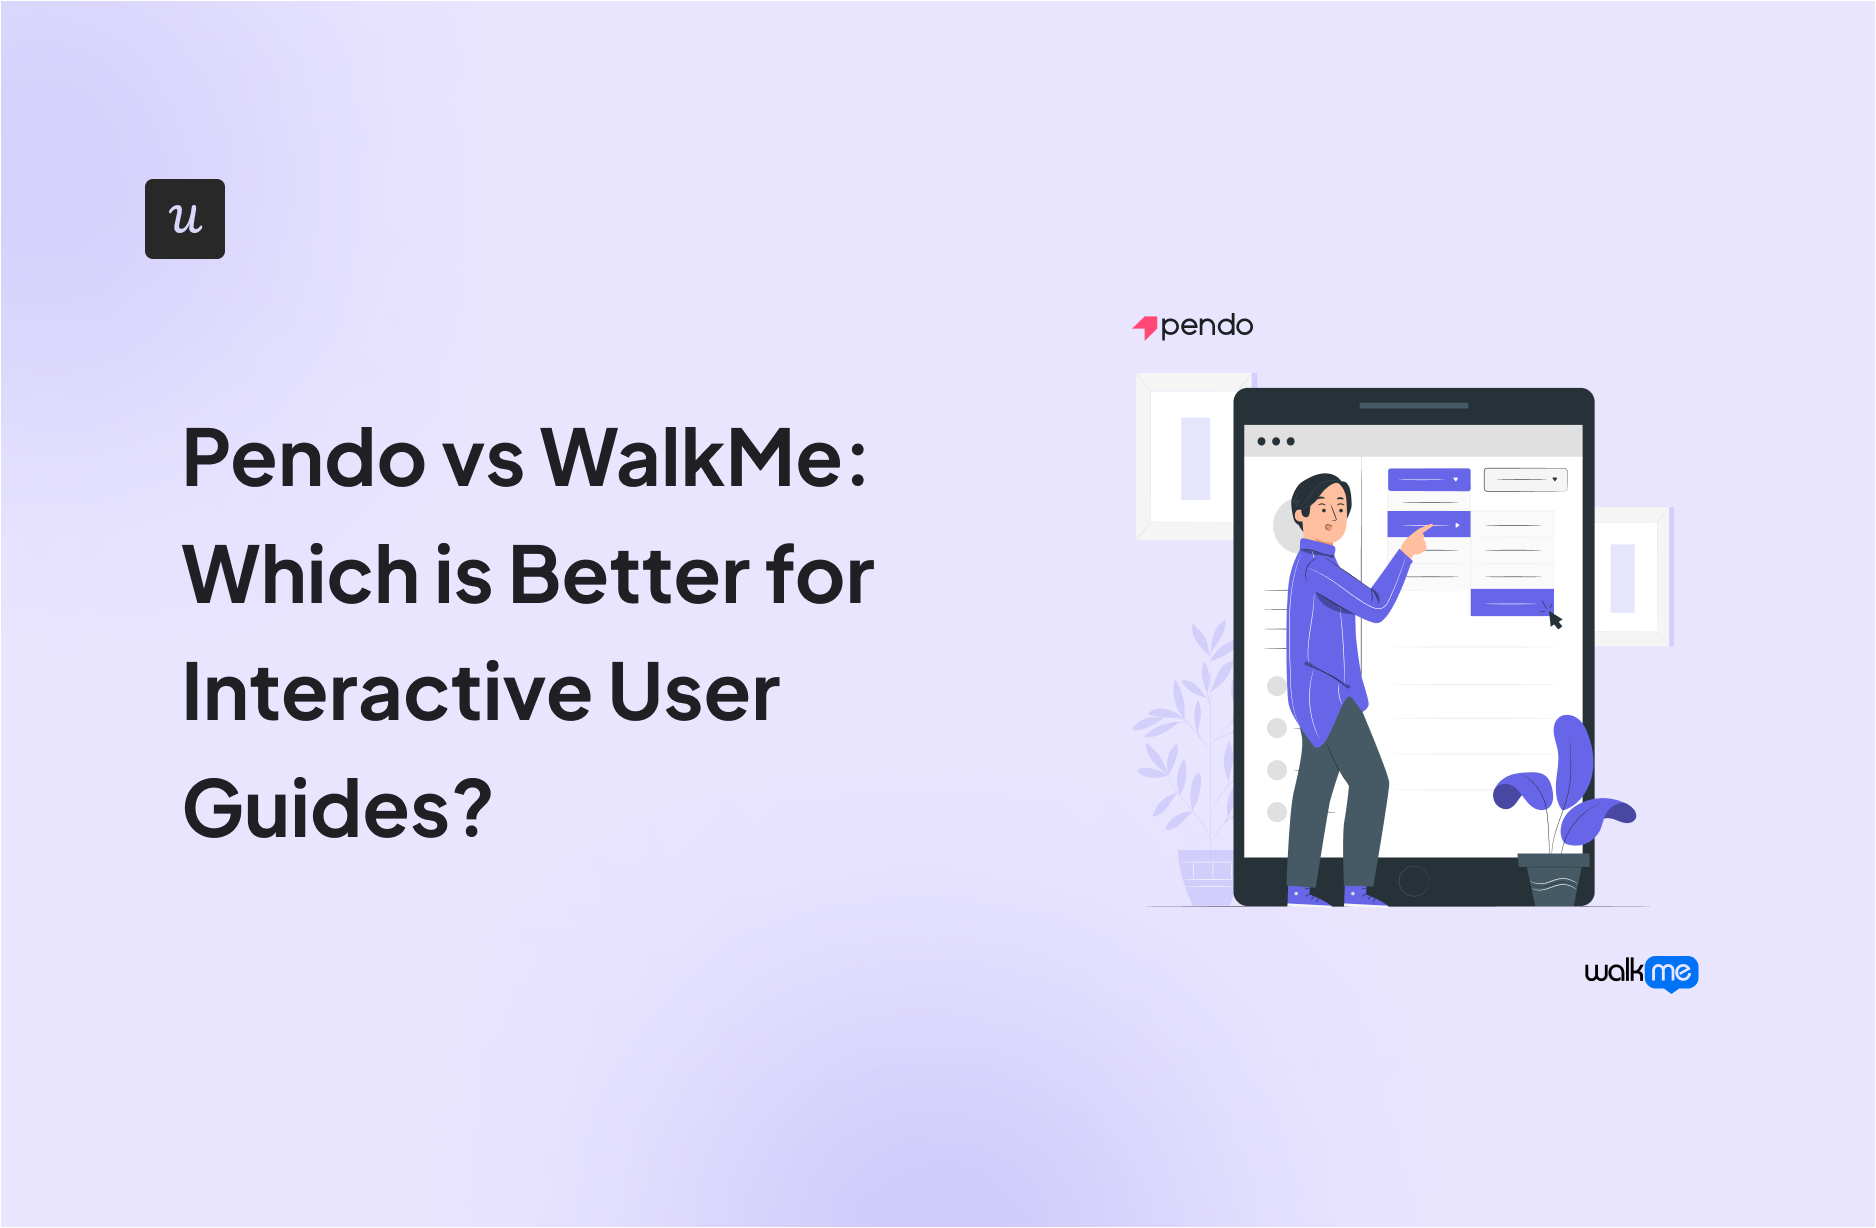 Pendo vs WalkMe: Which is Better for Interactive User Guides?